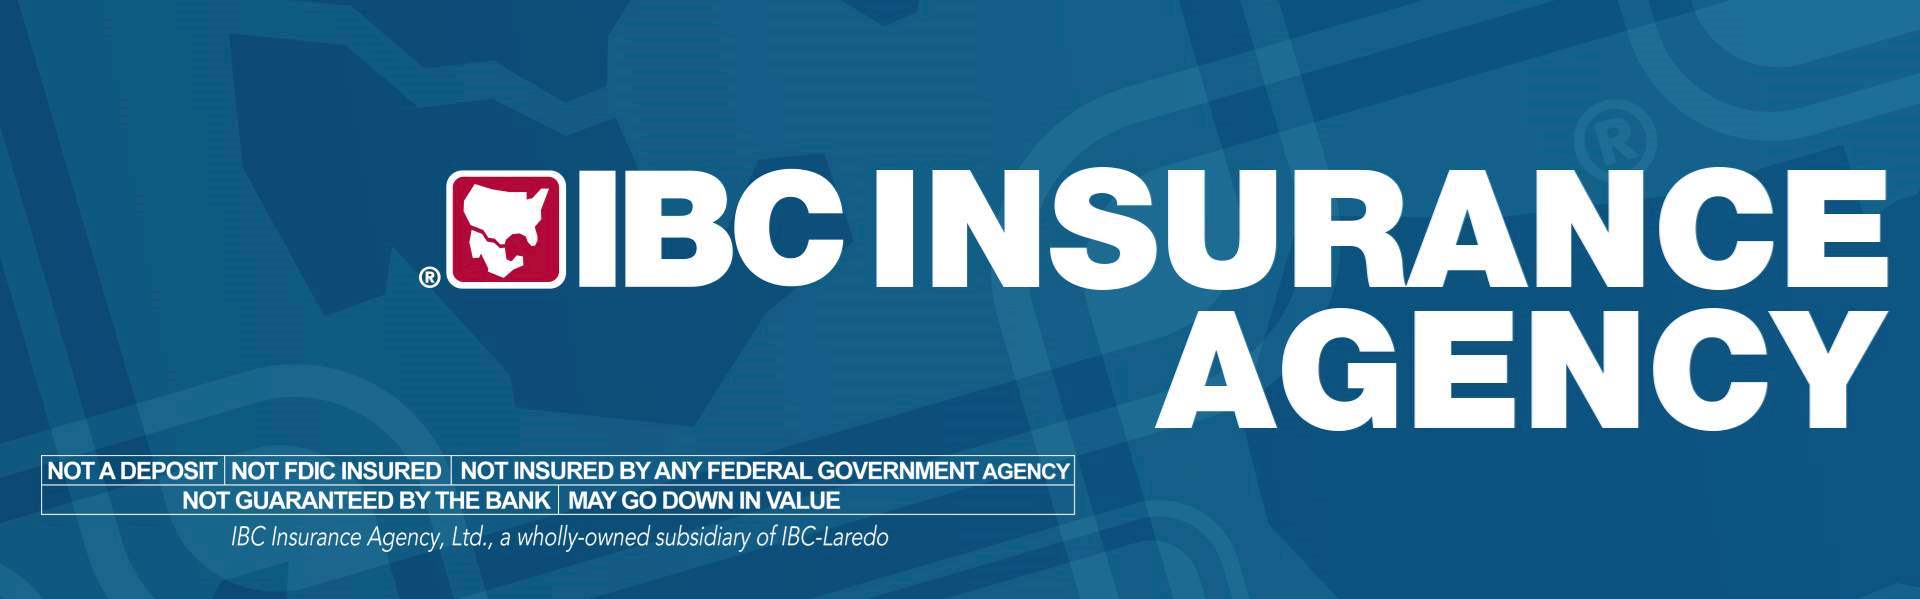 IBC Bank Insurance Officers